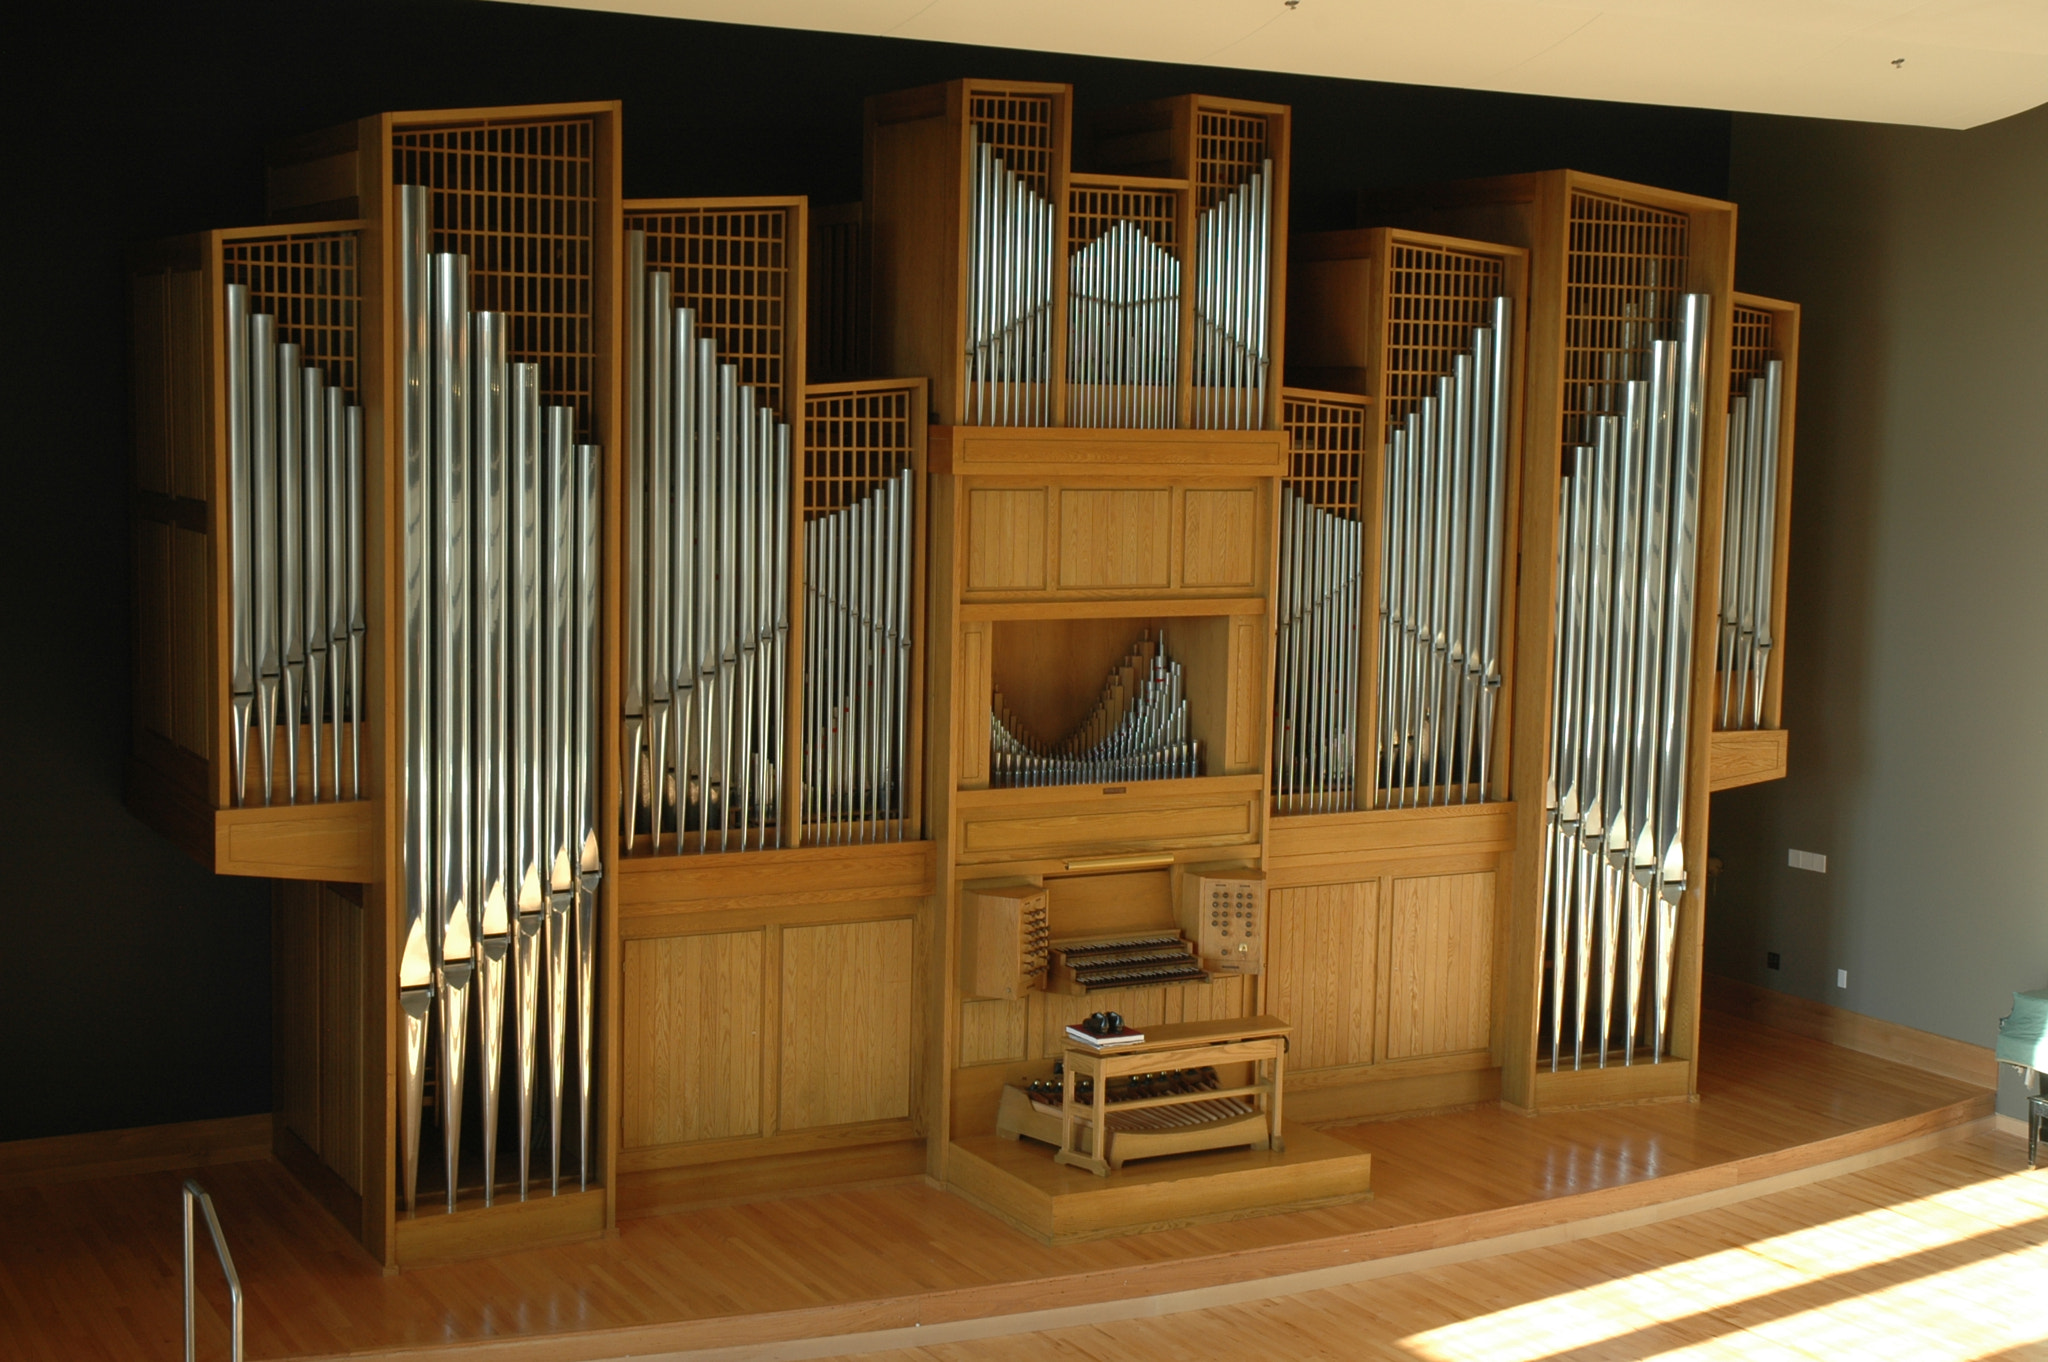 Nikon AF-S DX Nikkor 18-70mm F3.5-4.5G ED-IF sample photo. Colorado state university: 1968 casavant organ, relocated to the (in 2008) new university center... photography